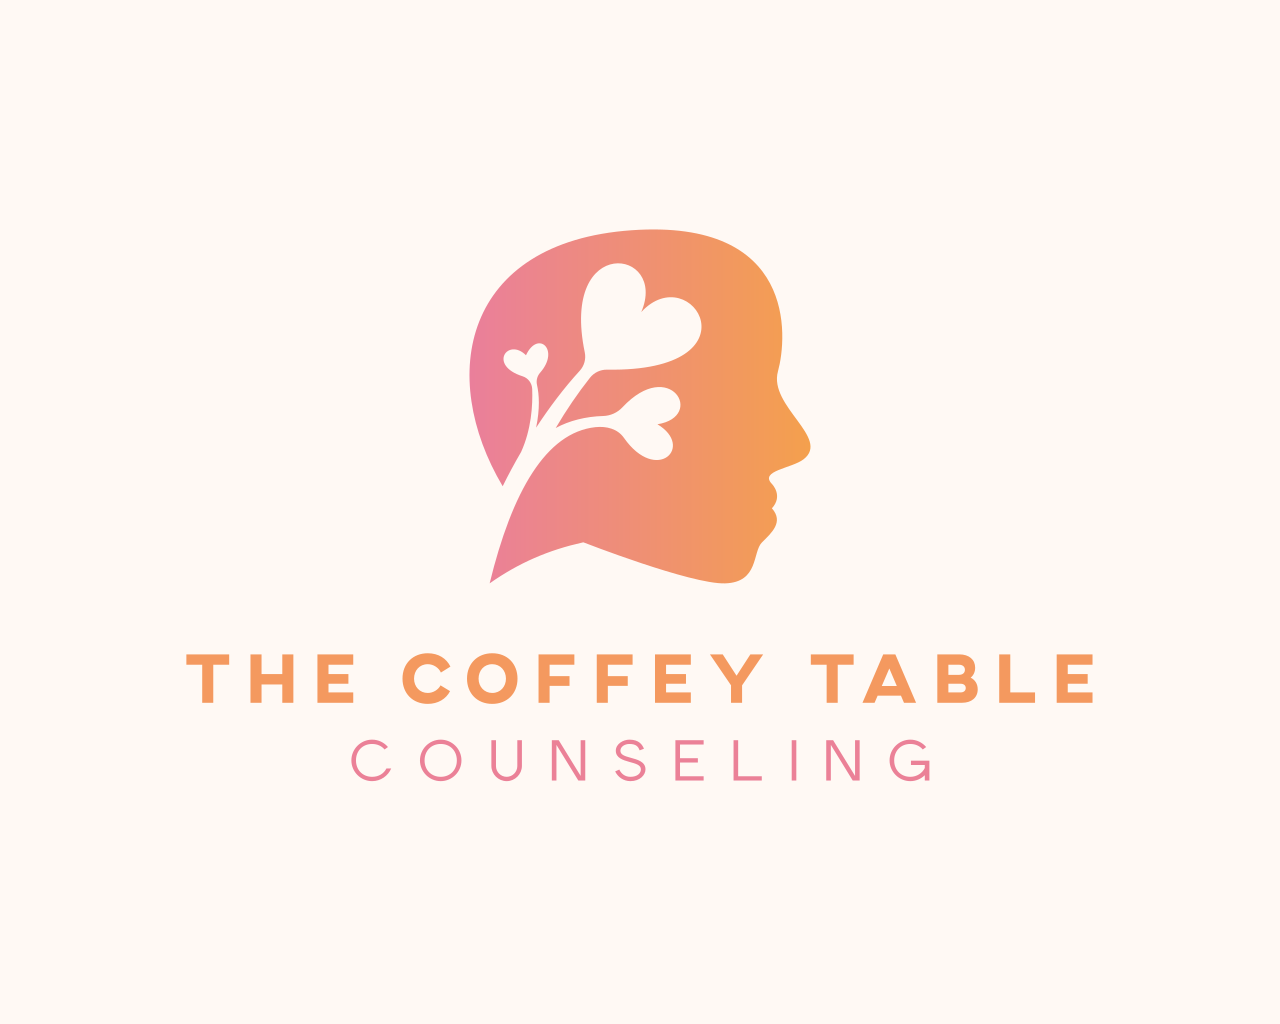 The Coffey Table